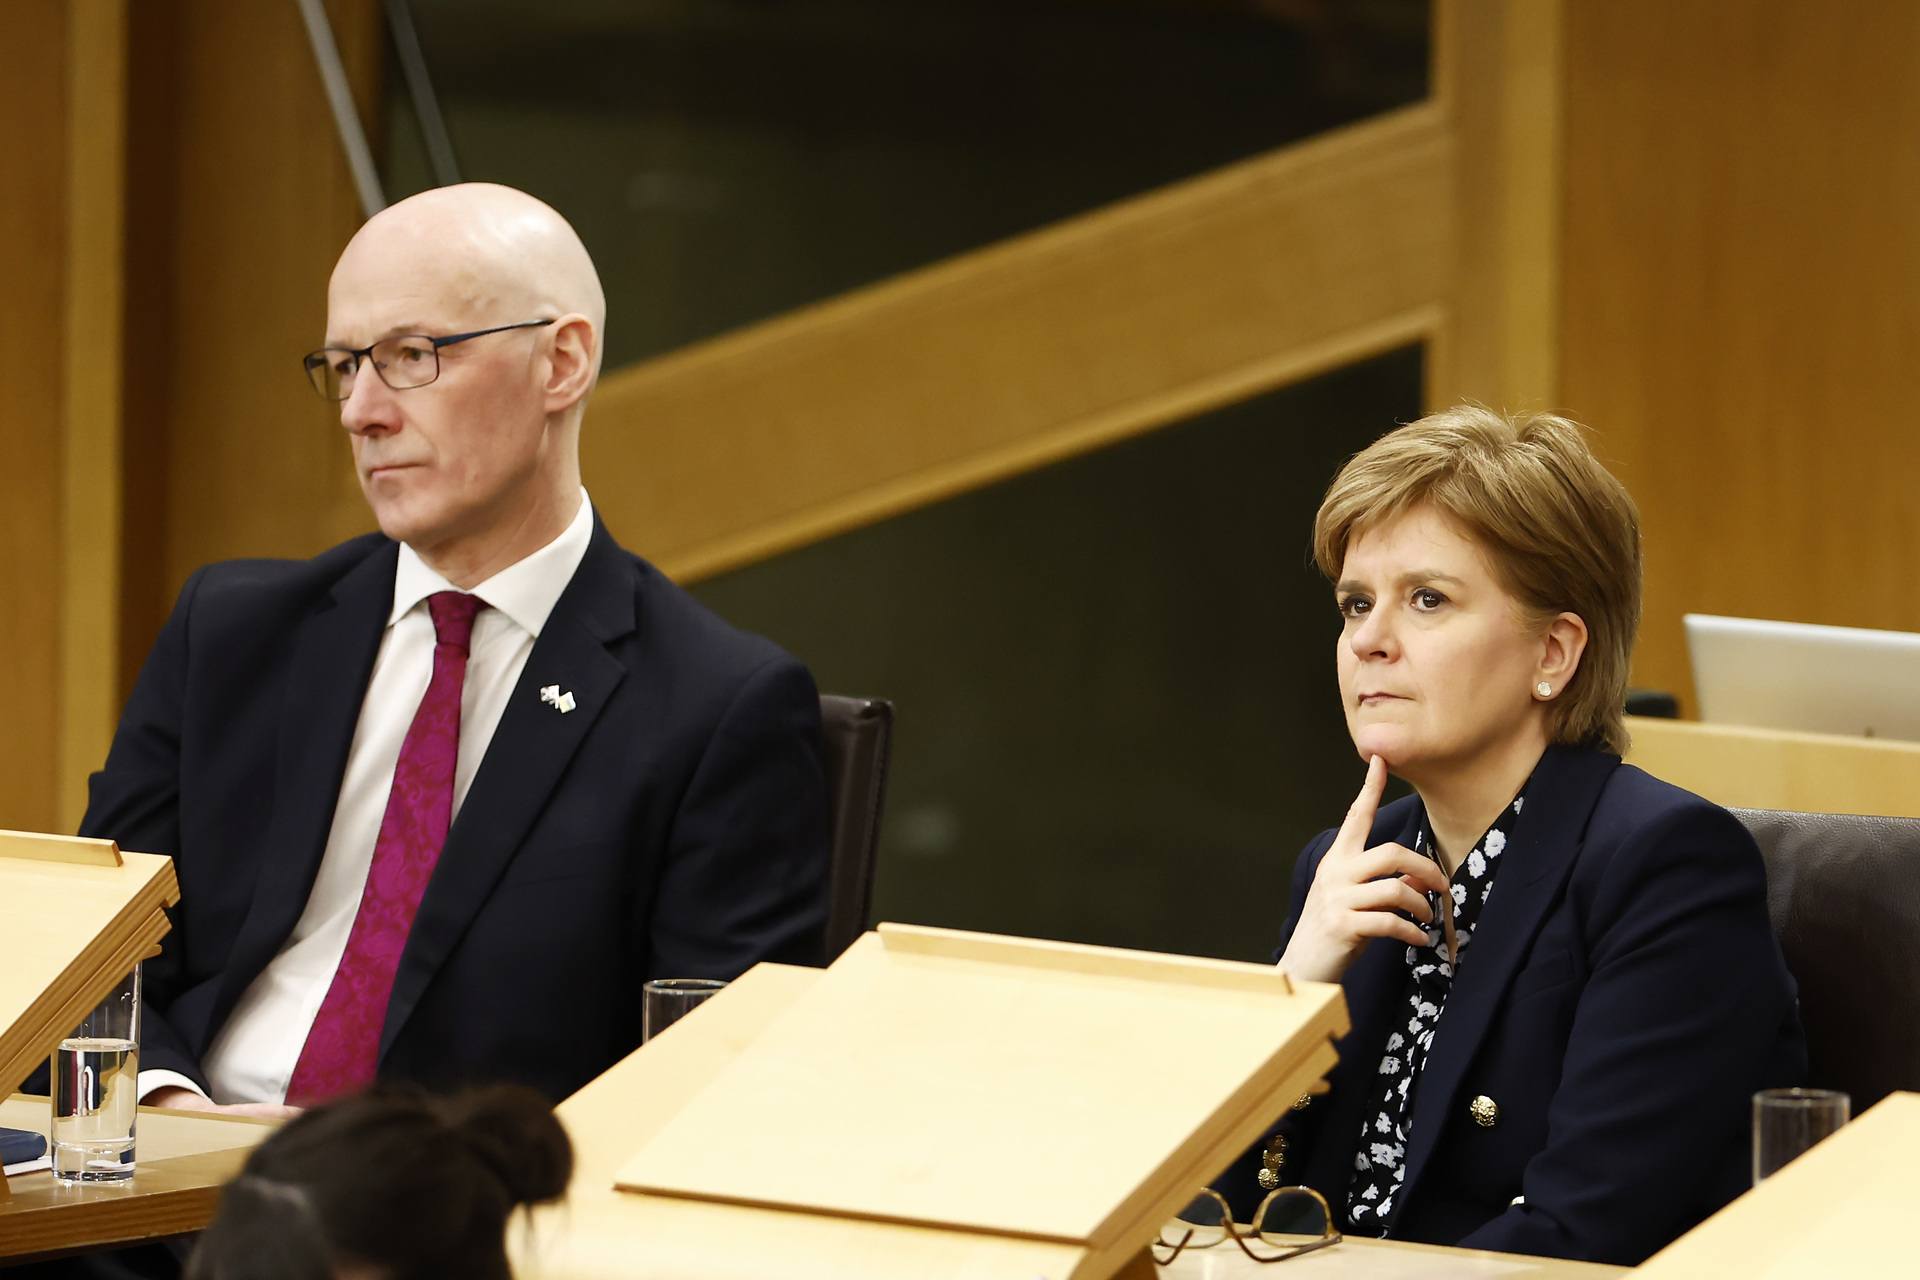 John Swinney claimed the Secretary of State for Scotland would have 'contributed nothing of useful value'. (Photo by Jeff J Mitchell/Getty Images)